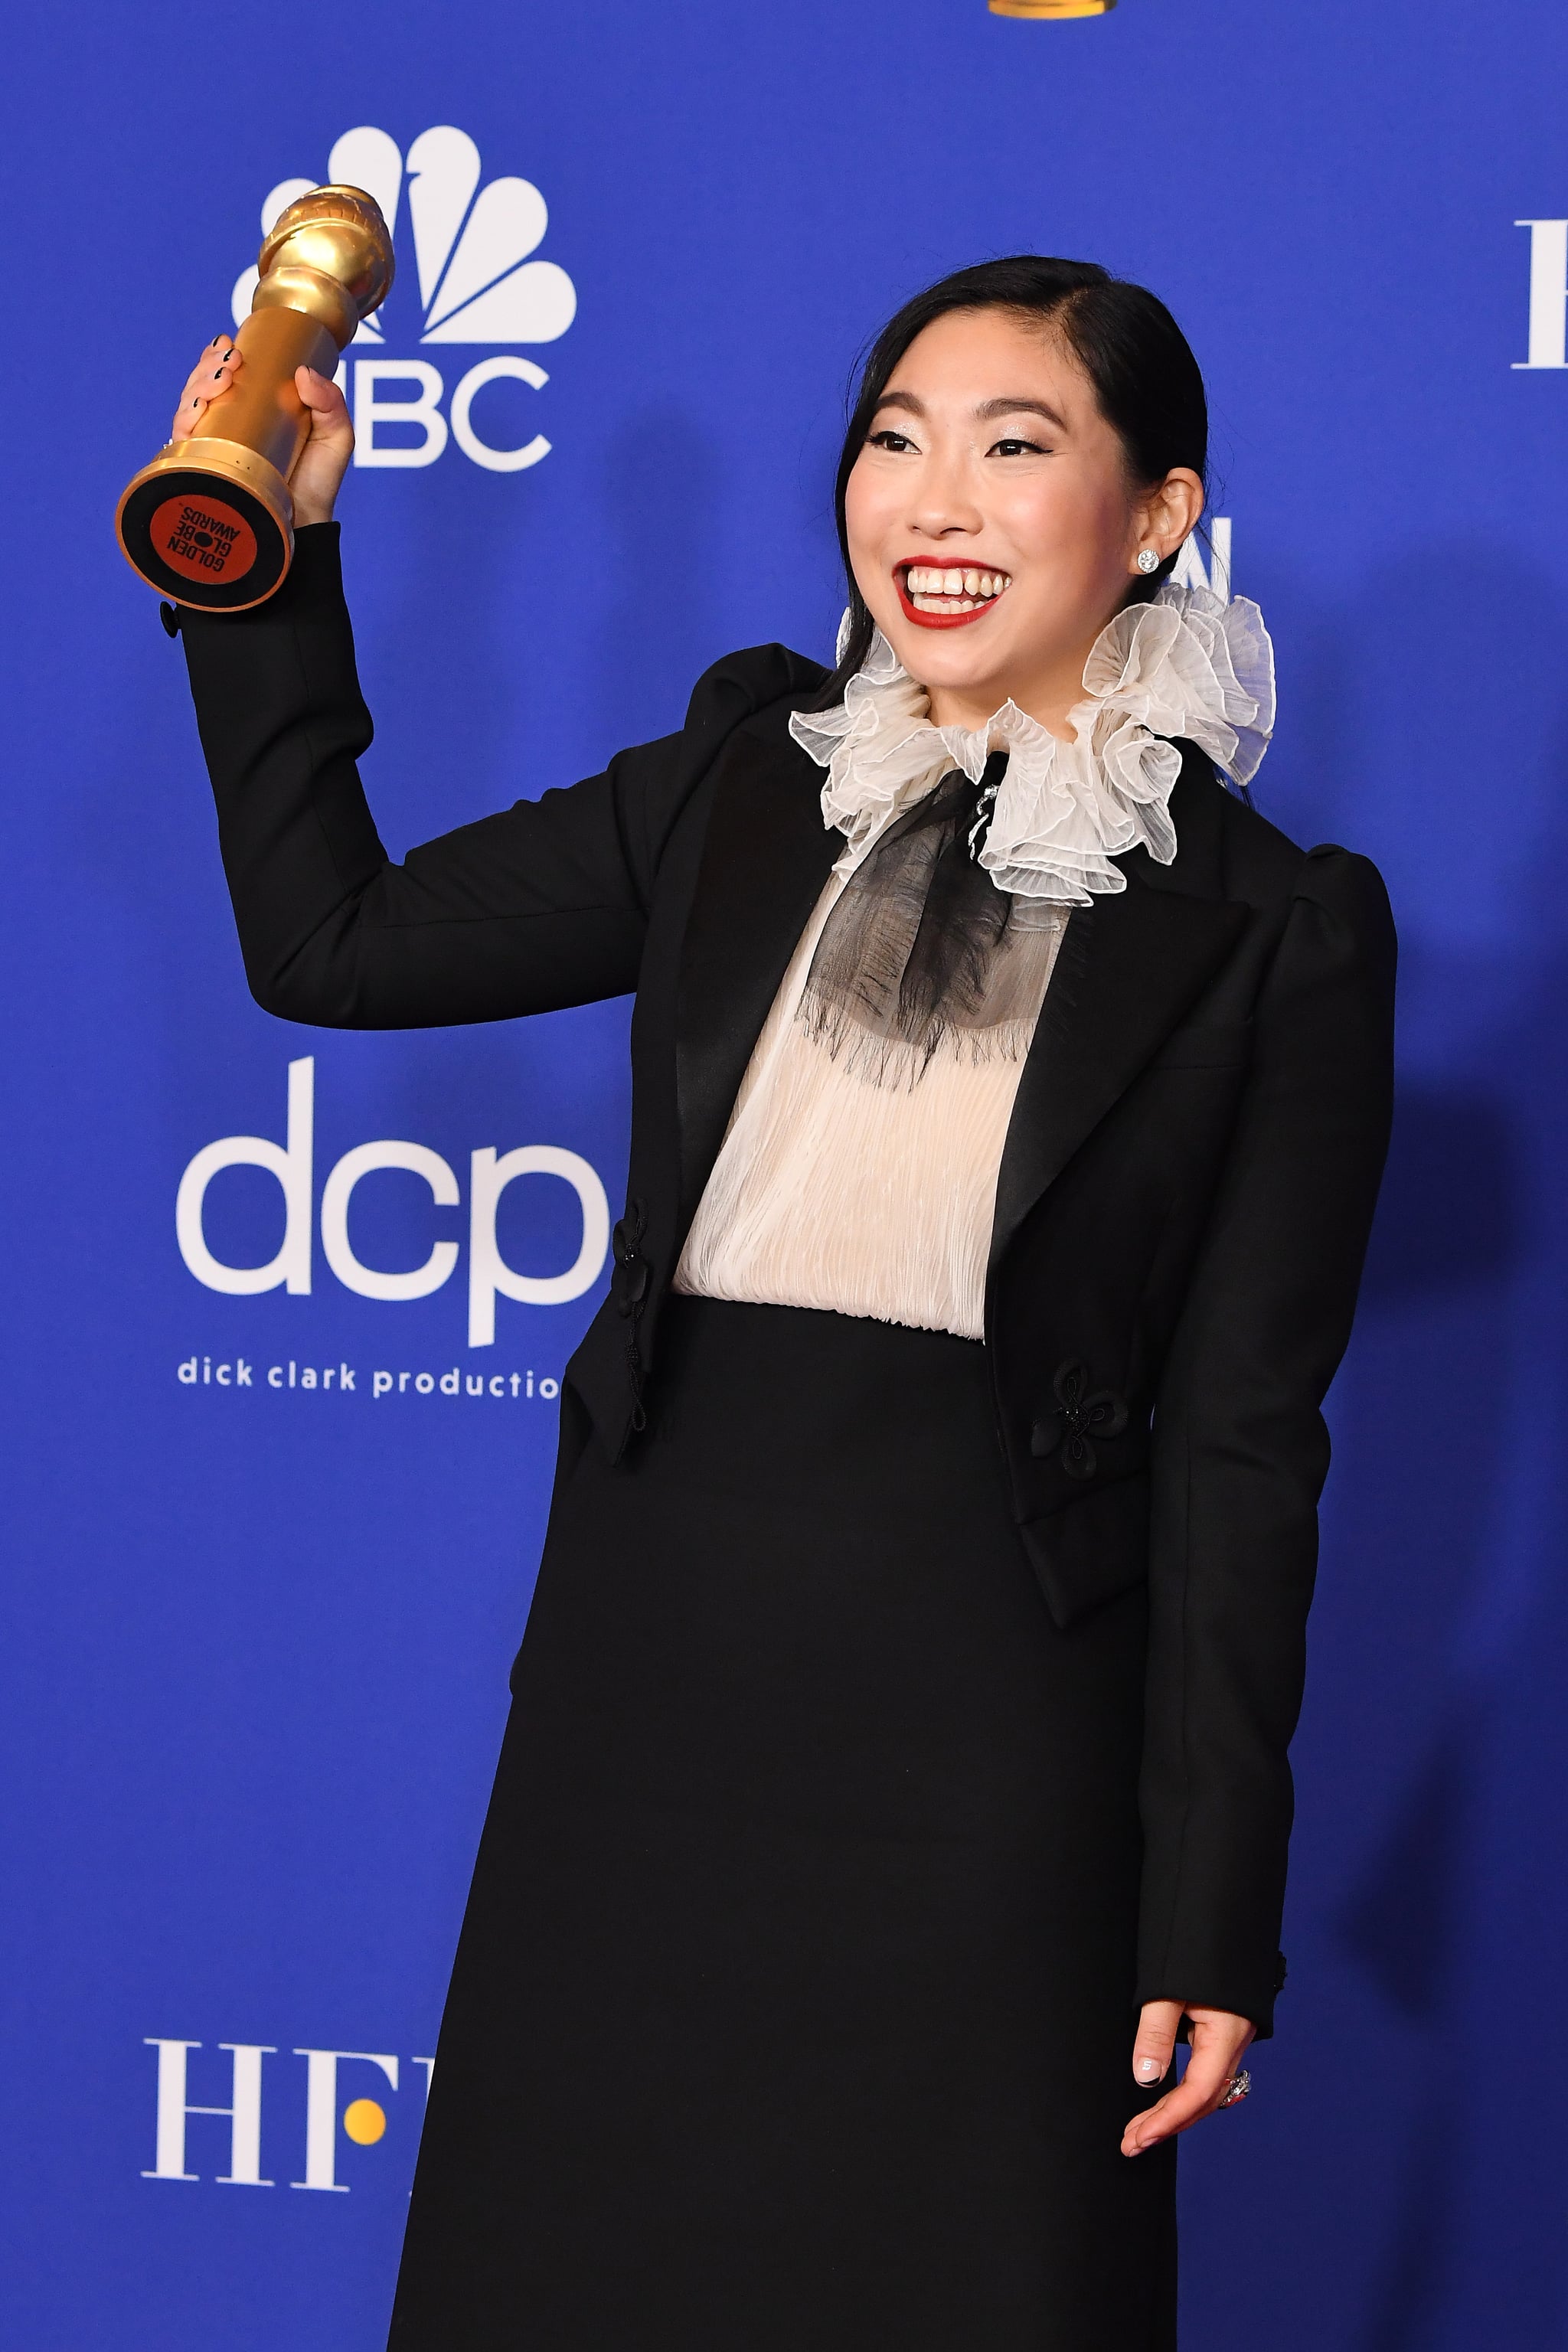 BEVERLY HILLS, CALIFORNIA - JANUARY 05: Awkwafina poses in the press room during the 77th Annual Golden Globe Awards at The Beverly Hilton Hotel on January 05, 2020 in Beverly Hills, California. (Photo by Steve Granitz/WireImage,)